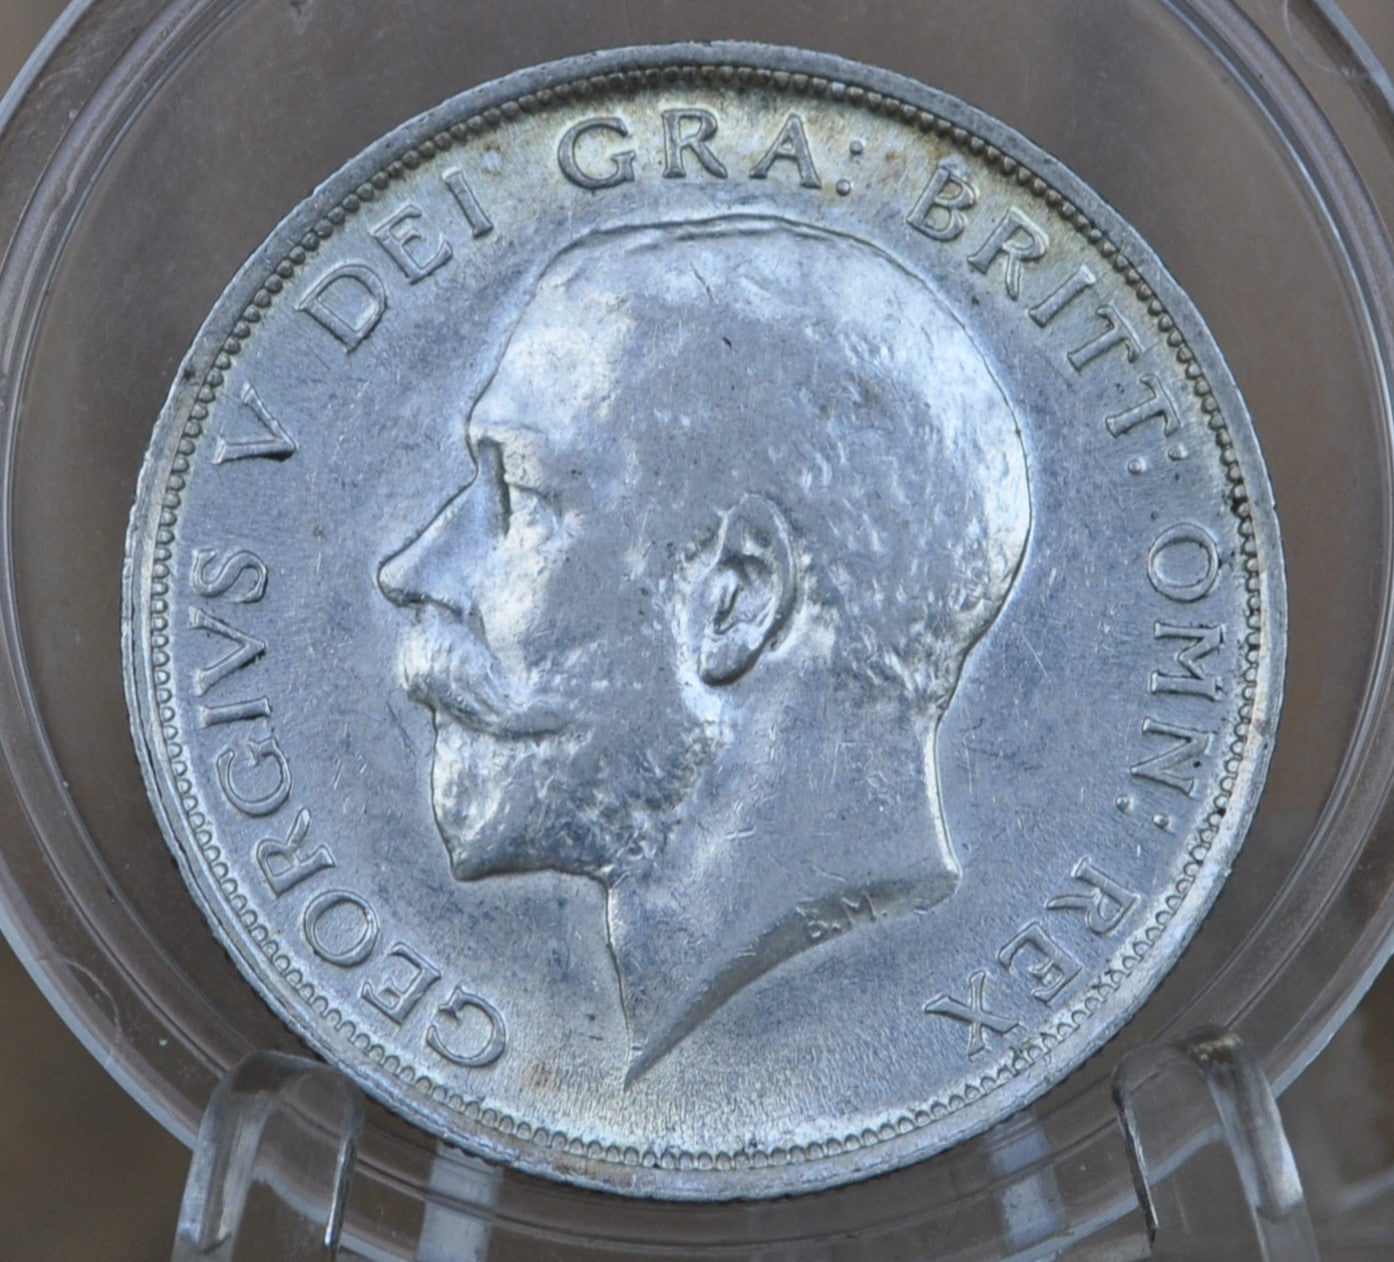 1916 Great Britain Half Crown - AU58 (About Uncirculated), Beautiful Mint Luster - Silver 1/2 Crown 1916 United Kingdom HalfCrown Silver UK 1916